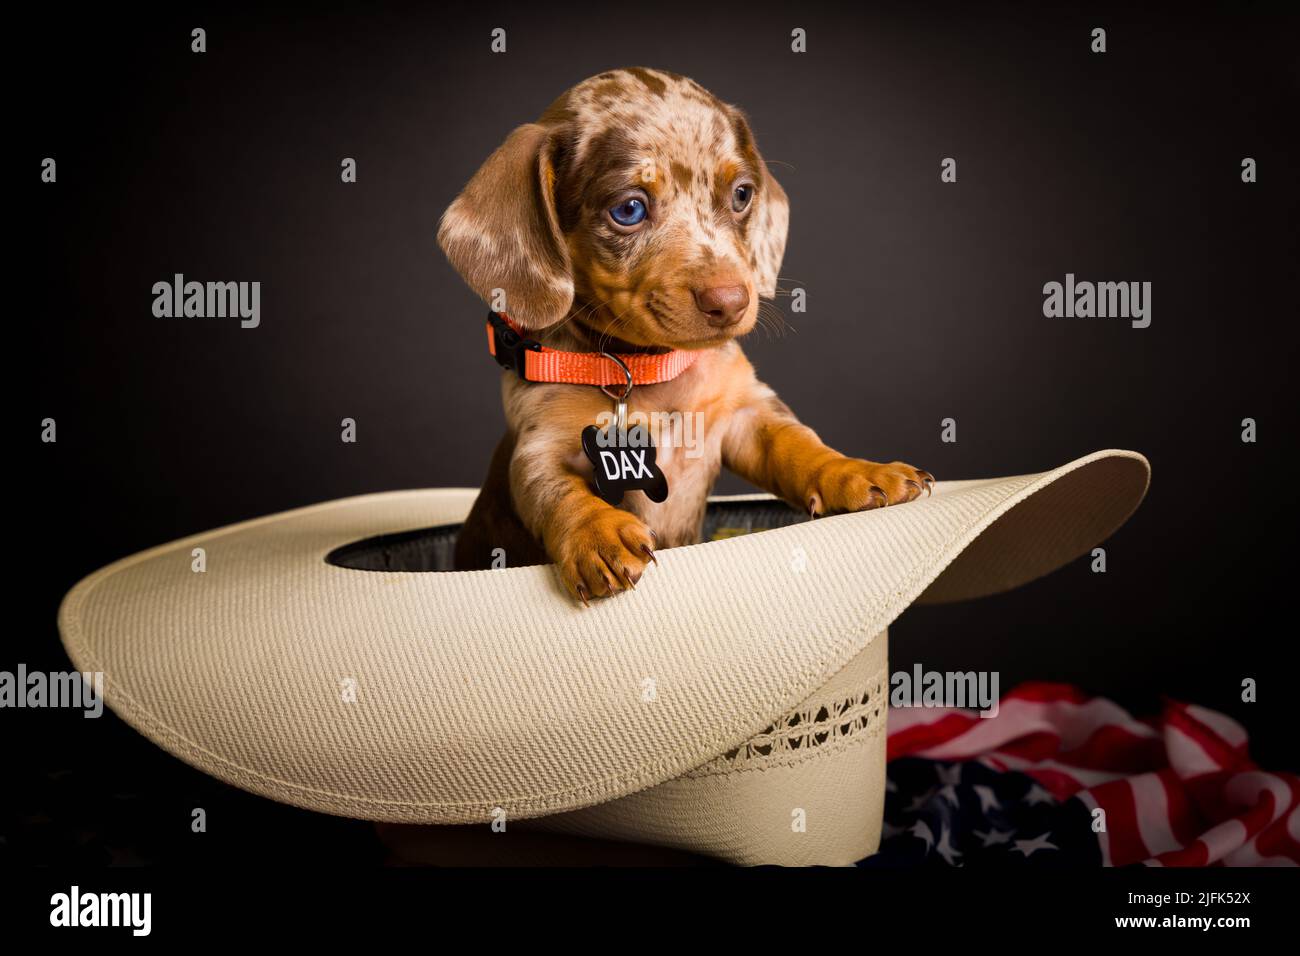 Very cute high definition studio portraits of Dachs Stock Photo